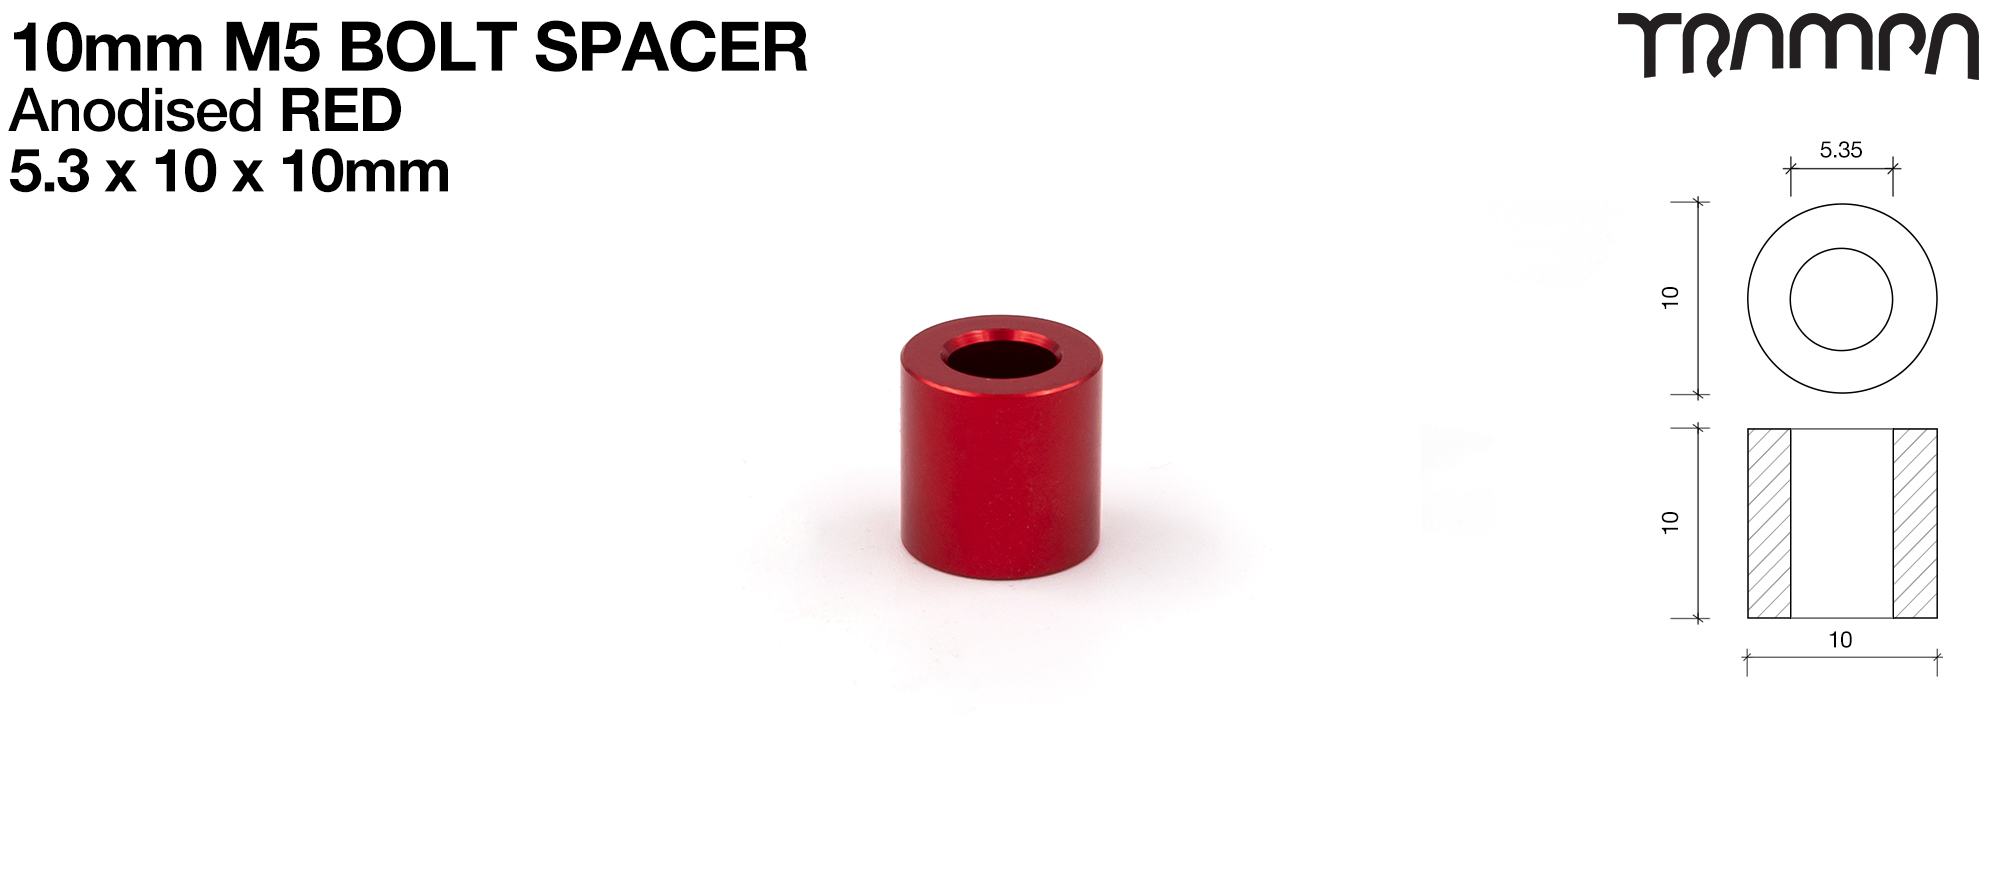 M5 x 10 x 10mm Spacer - Anodised RED